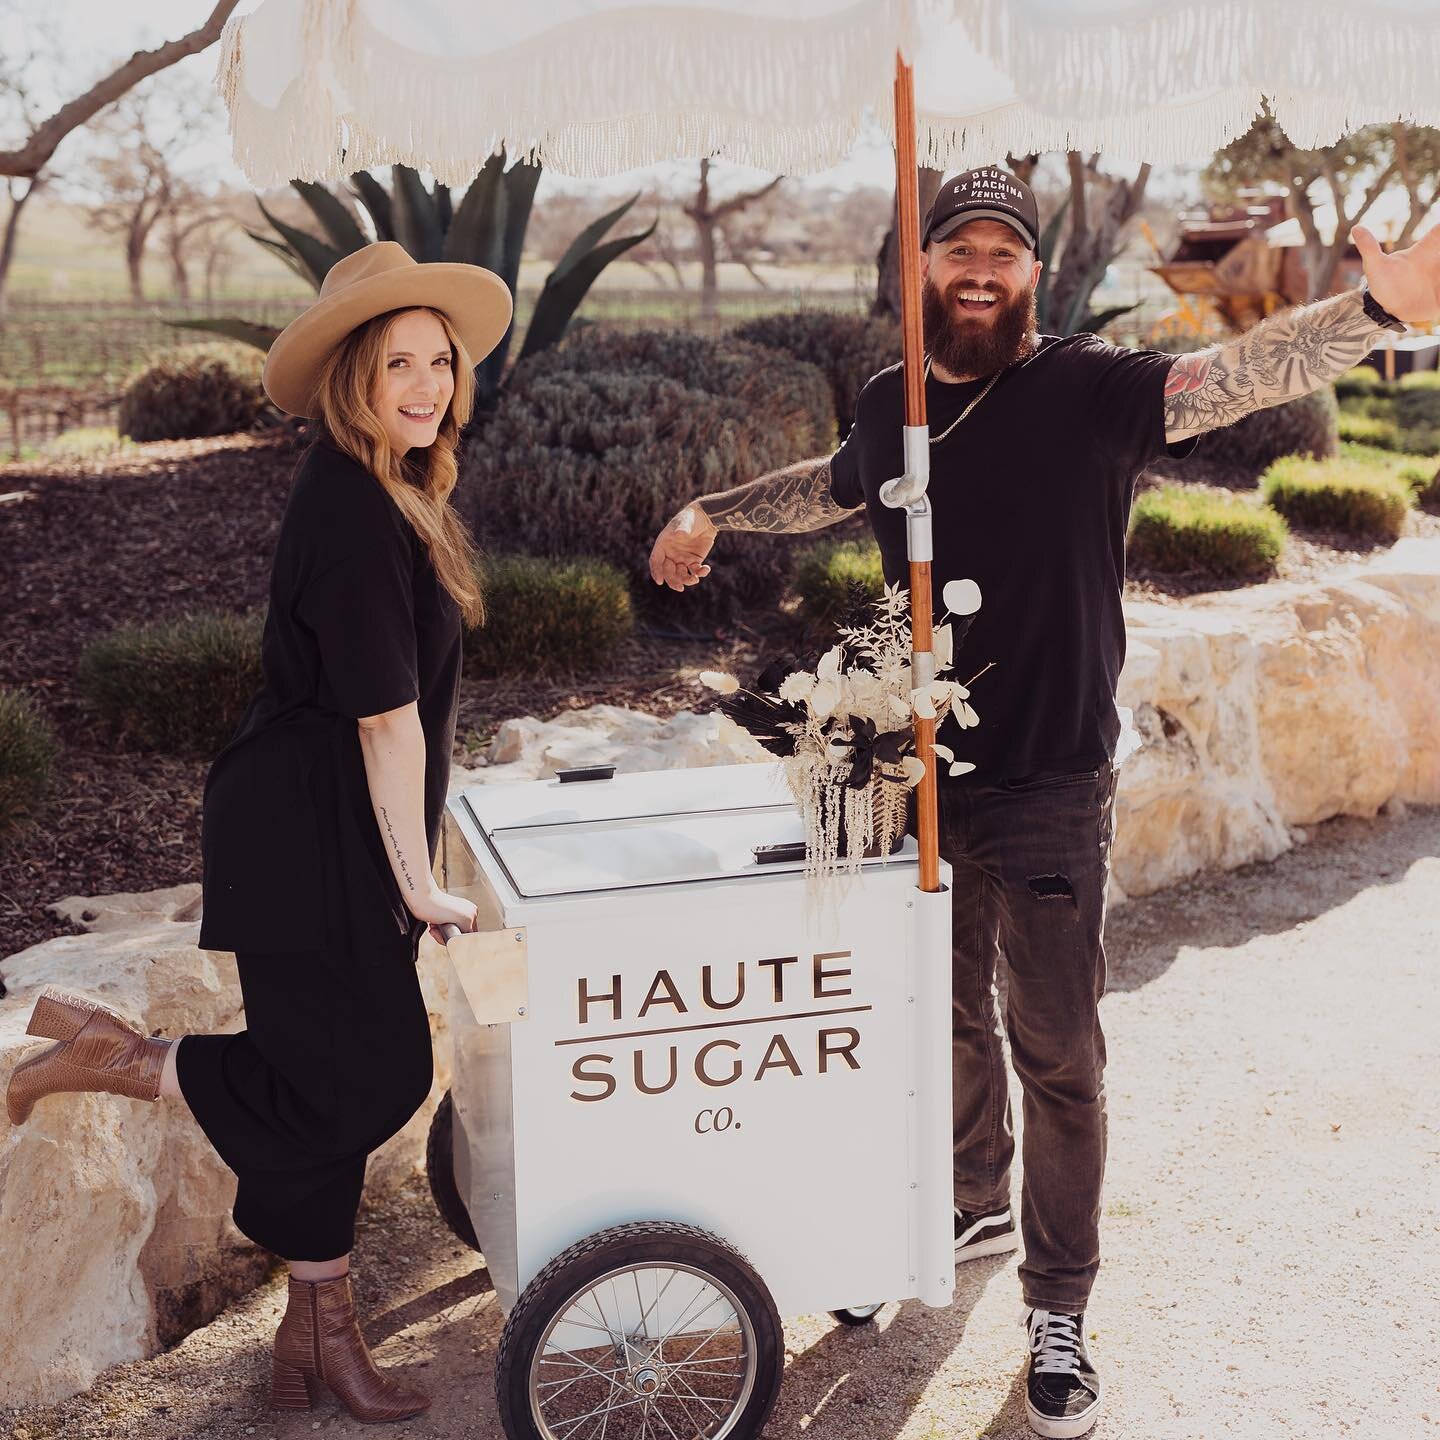 Hauties we are feeeeelin the love for the Mini Ice Cream Cart! So many inquiries and bookings! Dang we should&rsquo;ve done this years ago 😜🍦👏🏼! #entrepreneurlife 

.
.
.
.
#hautesugarco #scooppretty #icecreamcart  #cateringservice #wedding #birt